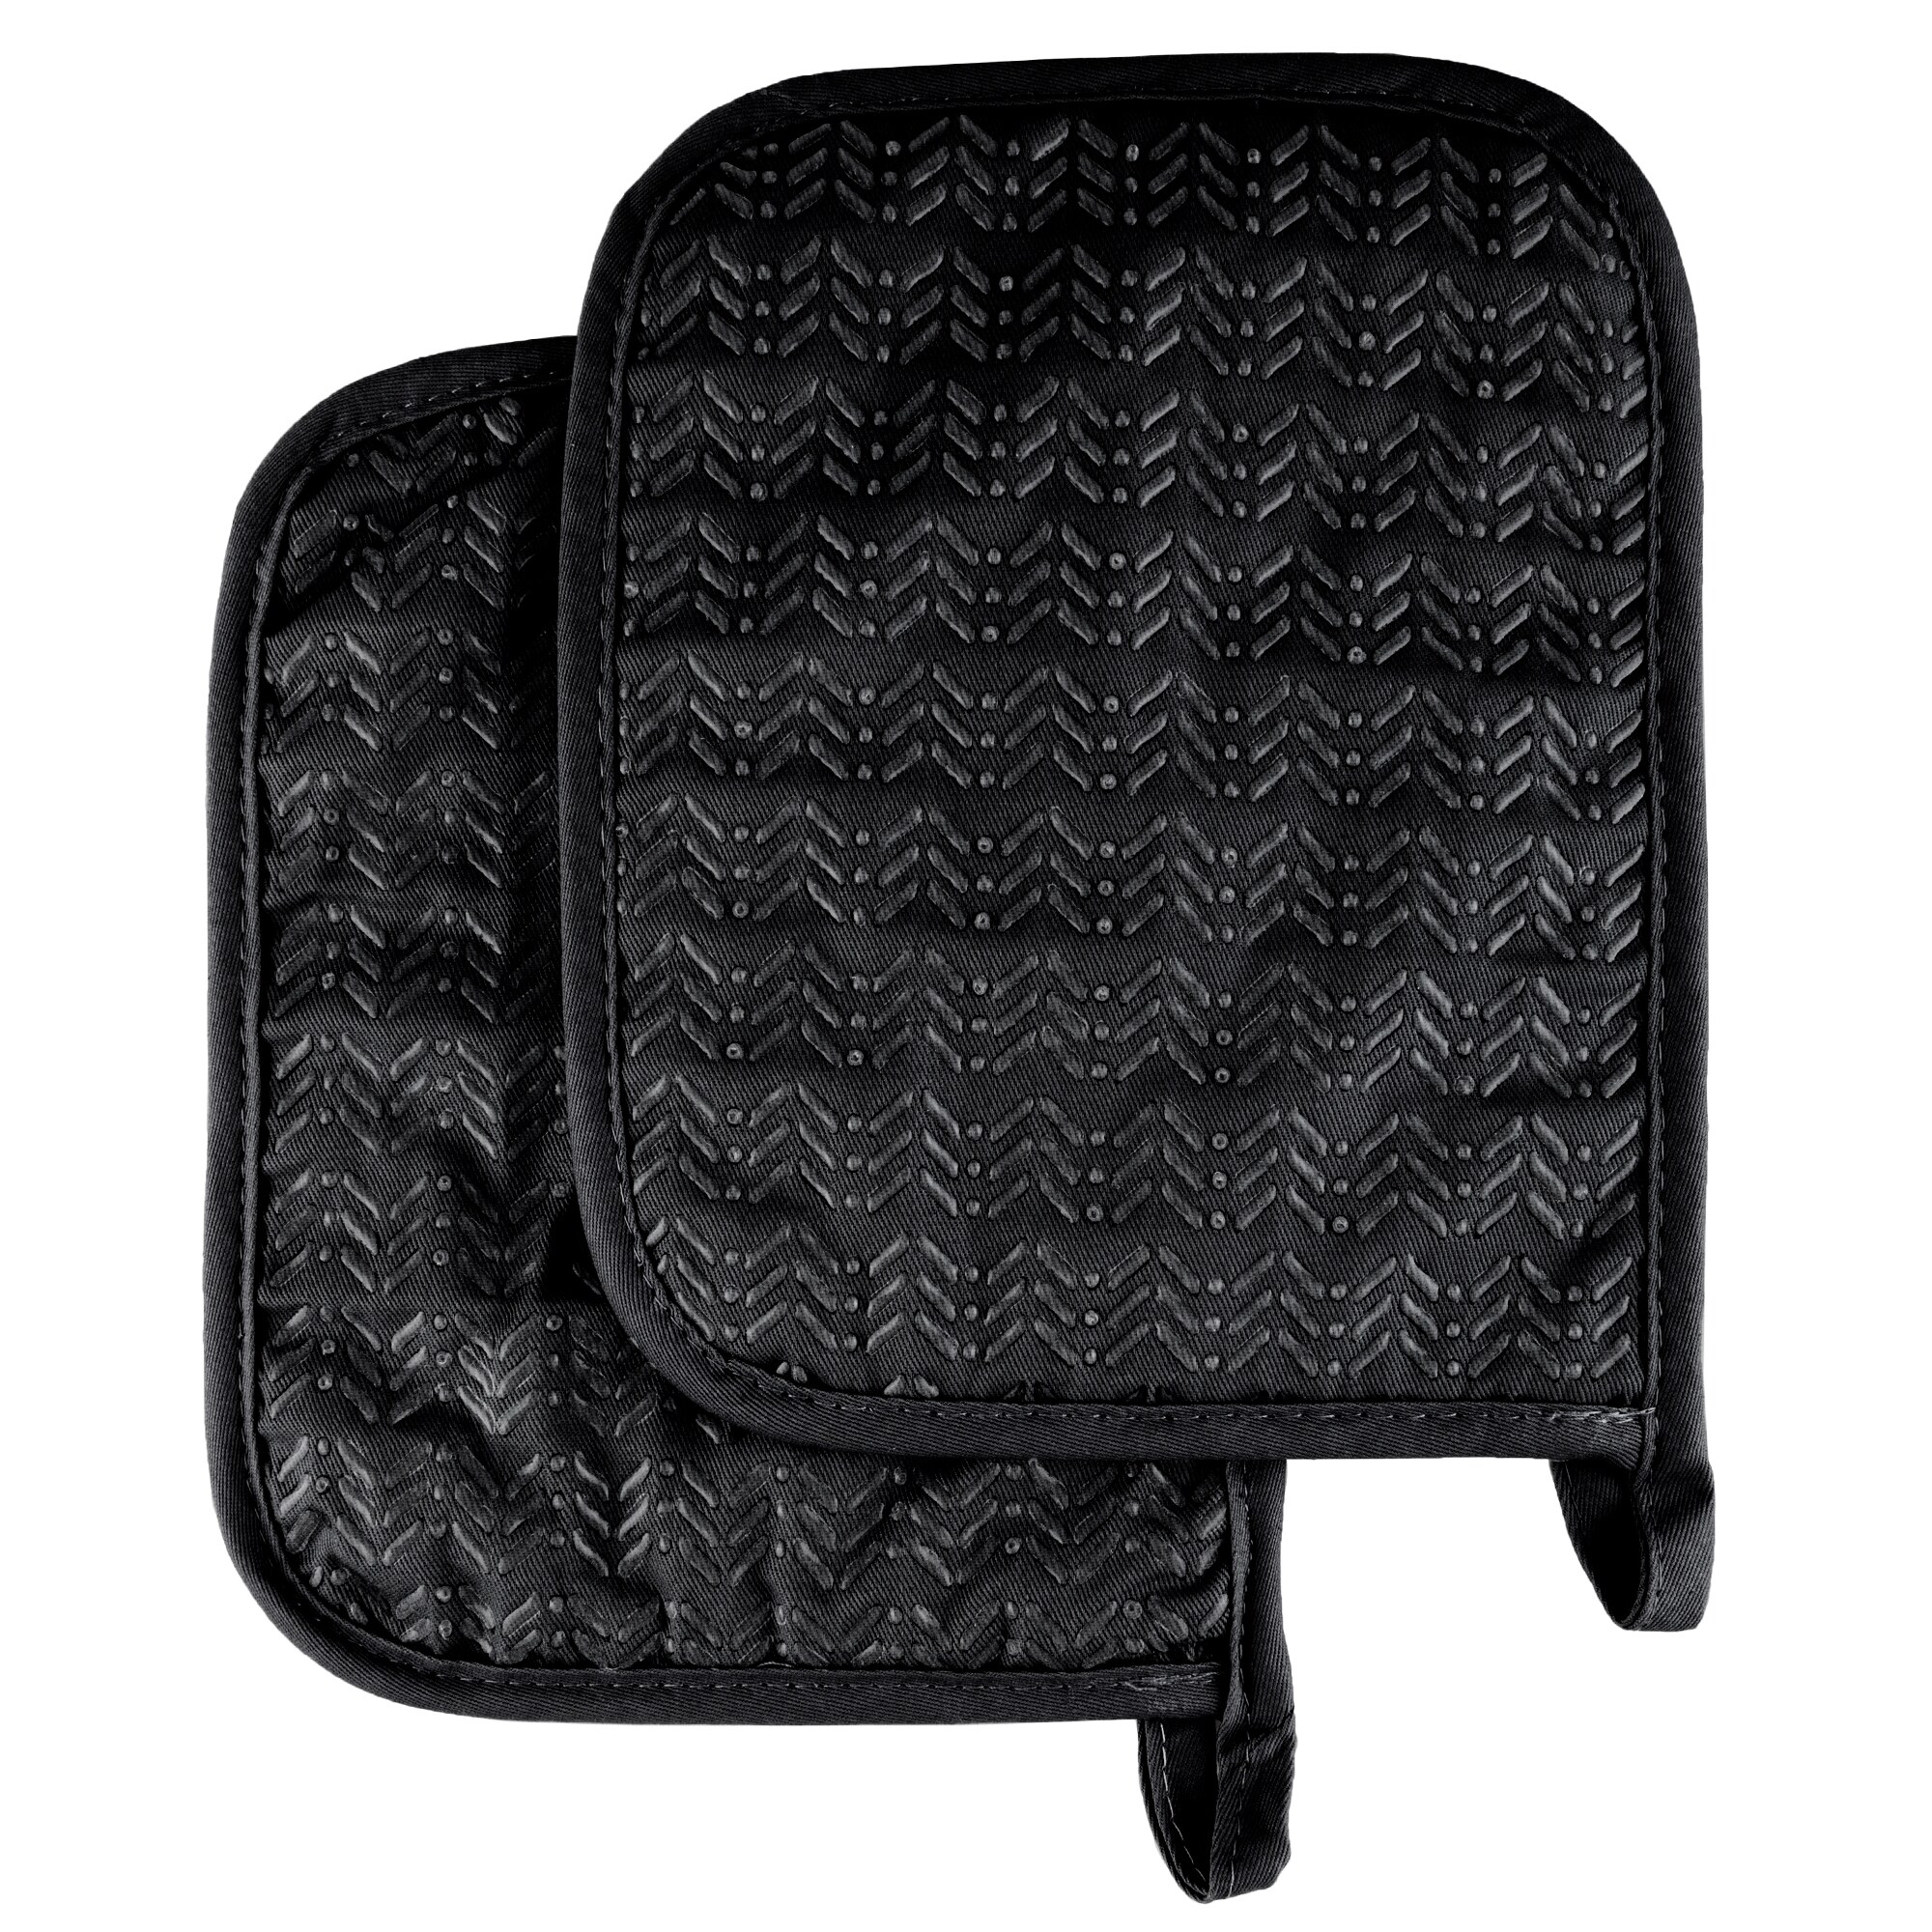 https://ak1.ostkcdn.com/images/products/15635885/Pot-Holder-Set-With-Silicone-Grip-Quilted-And-Heat-Resistant-Set-of-2-By-Windsor-Home-33ed9c3a-cc07-4c0a-ac6c-2e306586c7fd.jpg